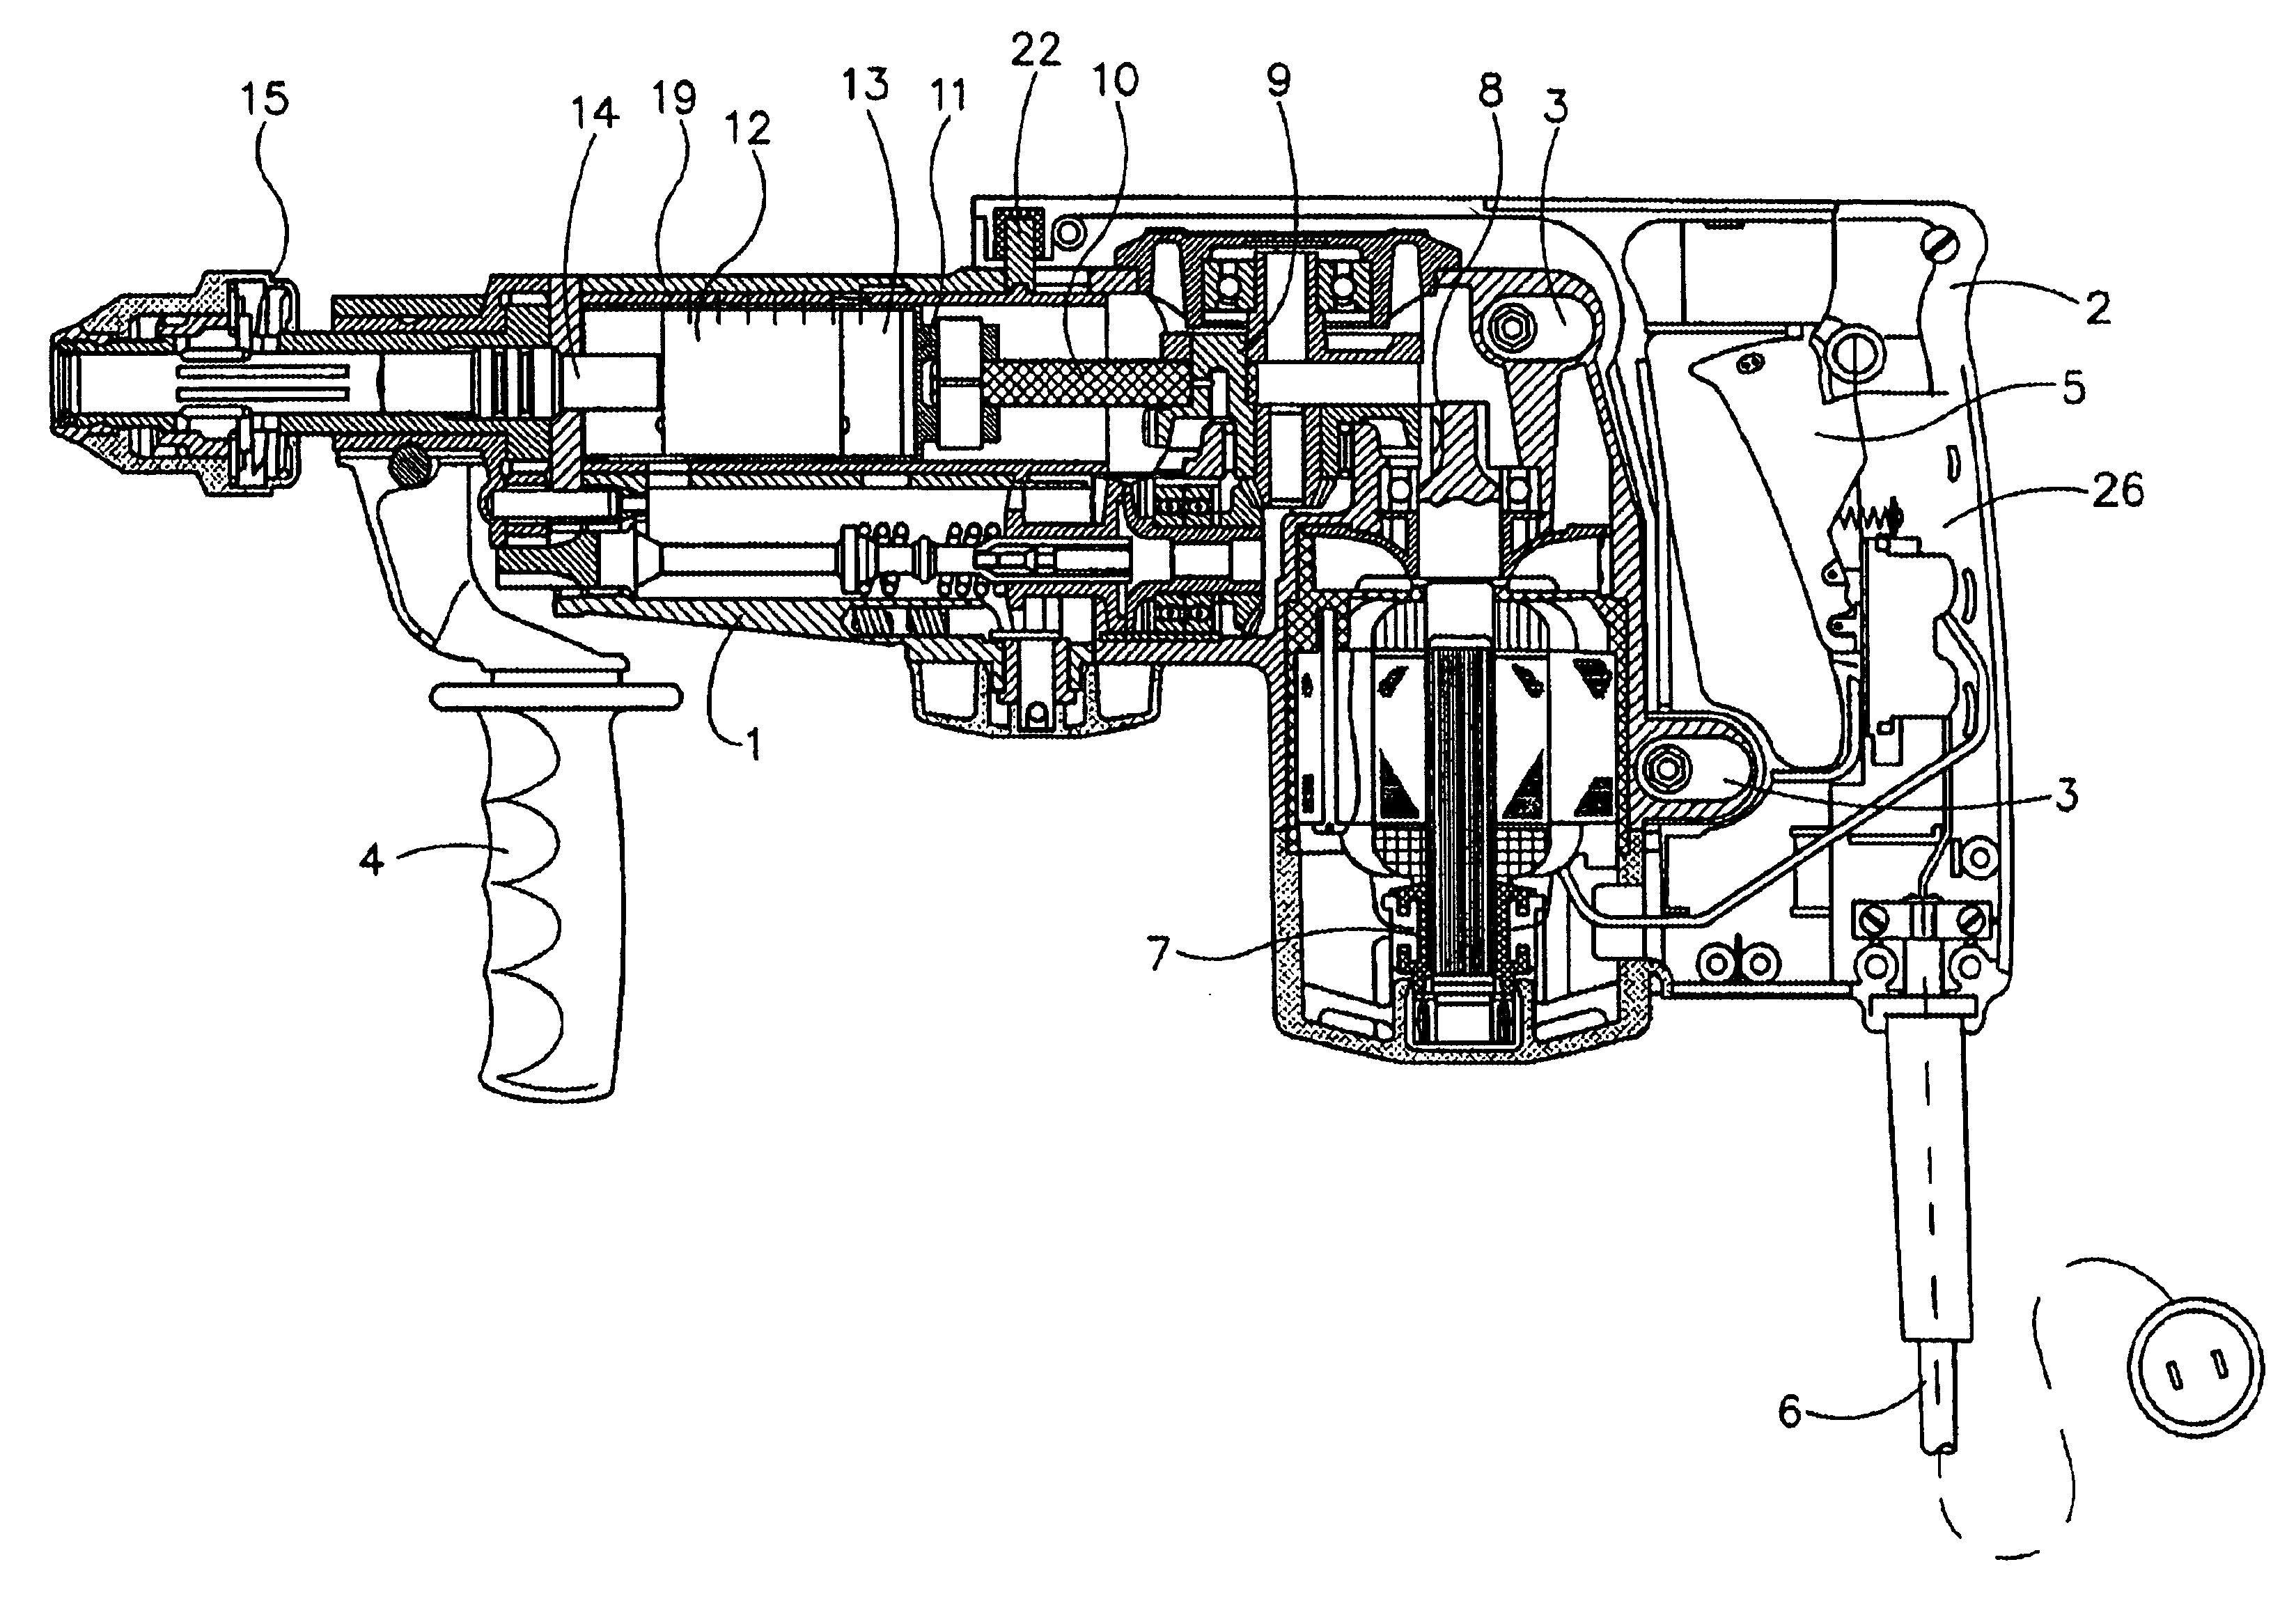 Hammer drill and /or percussion hammer with no-load operation control that depends on application pressure